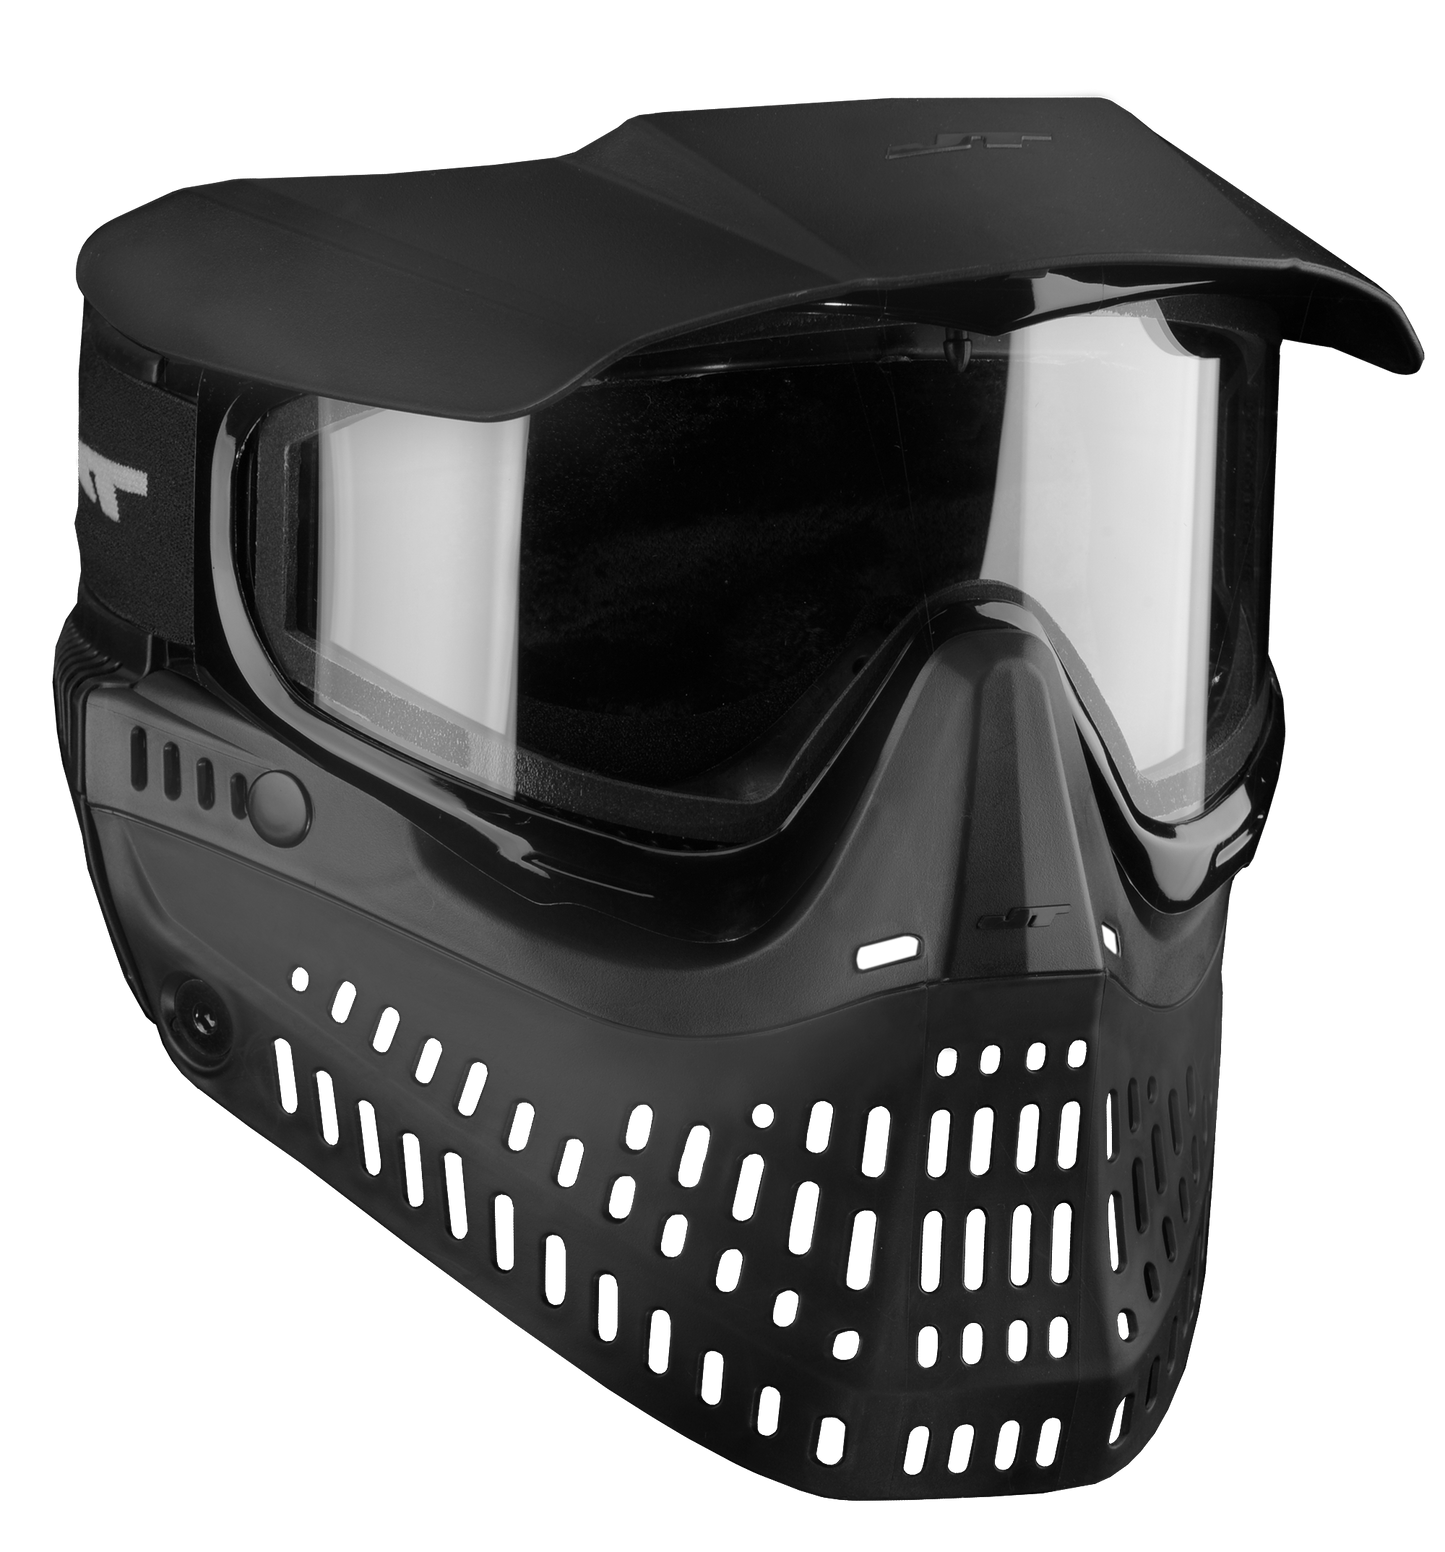 JT Paintball Spectra Proshield Goggle - Black - with lens [Thermal Clear]